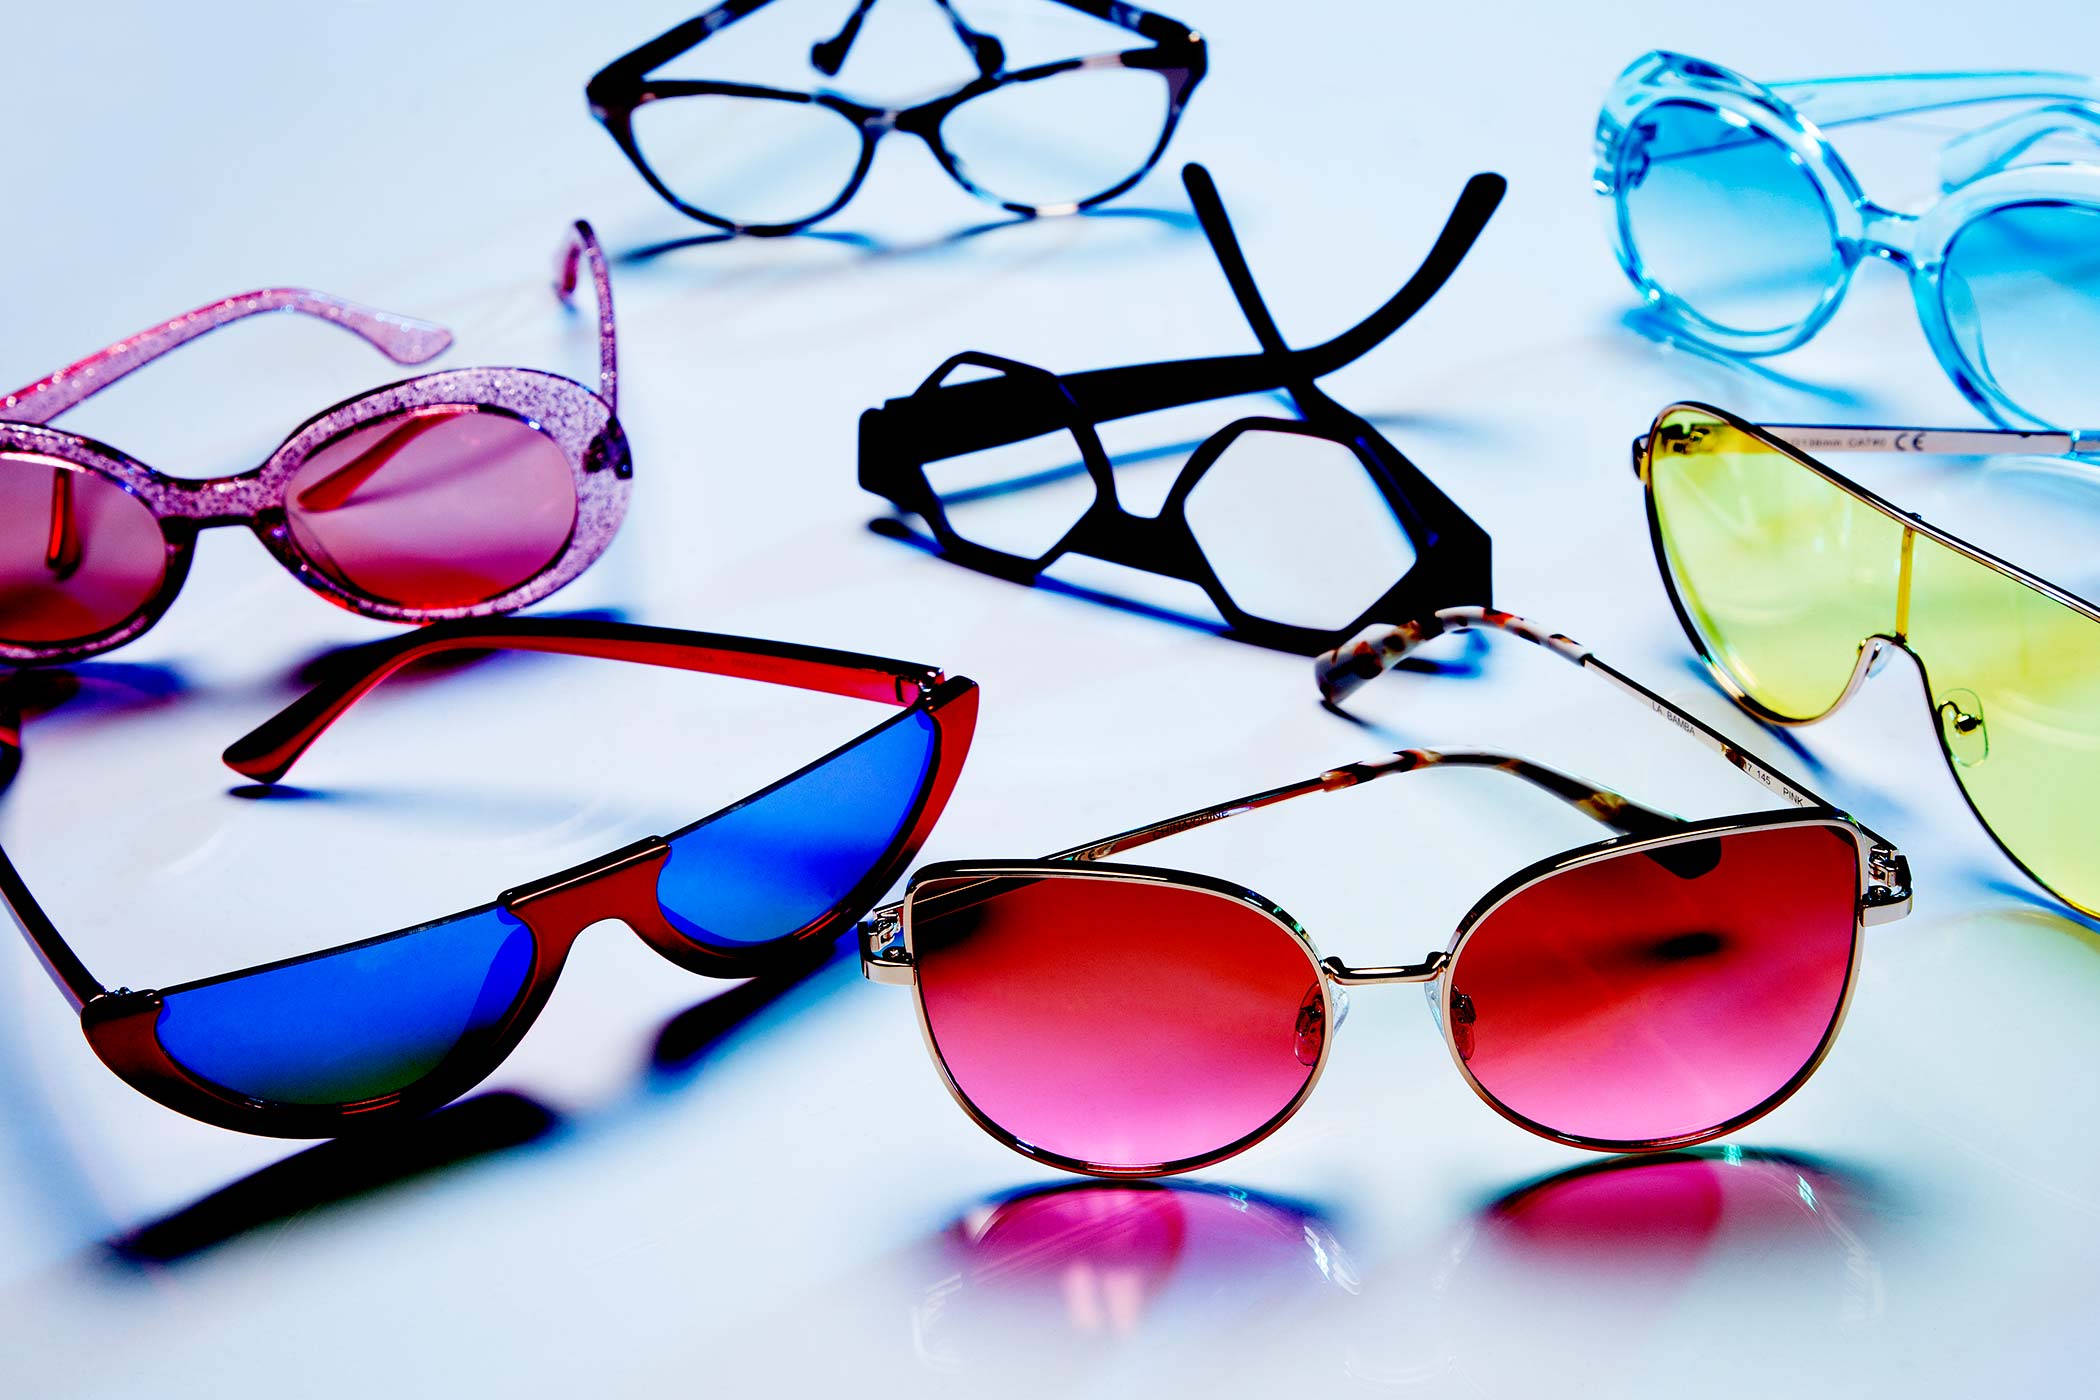 
Add style with statement-making glasses that make you look spectacular